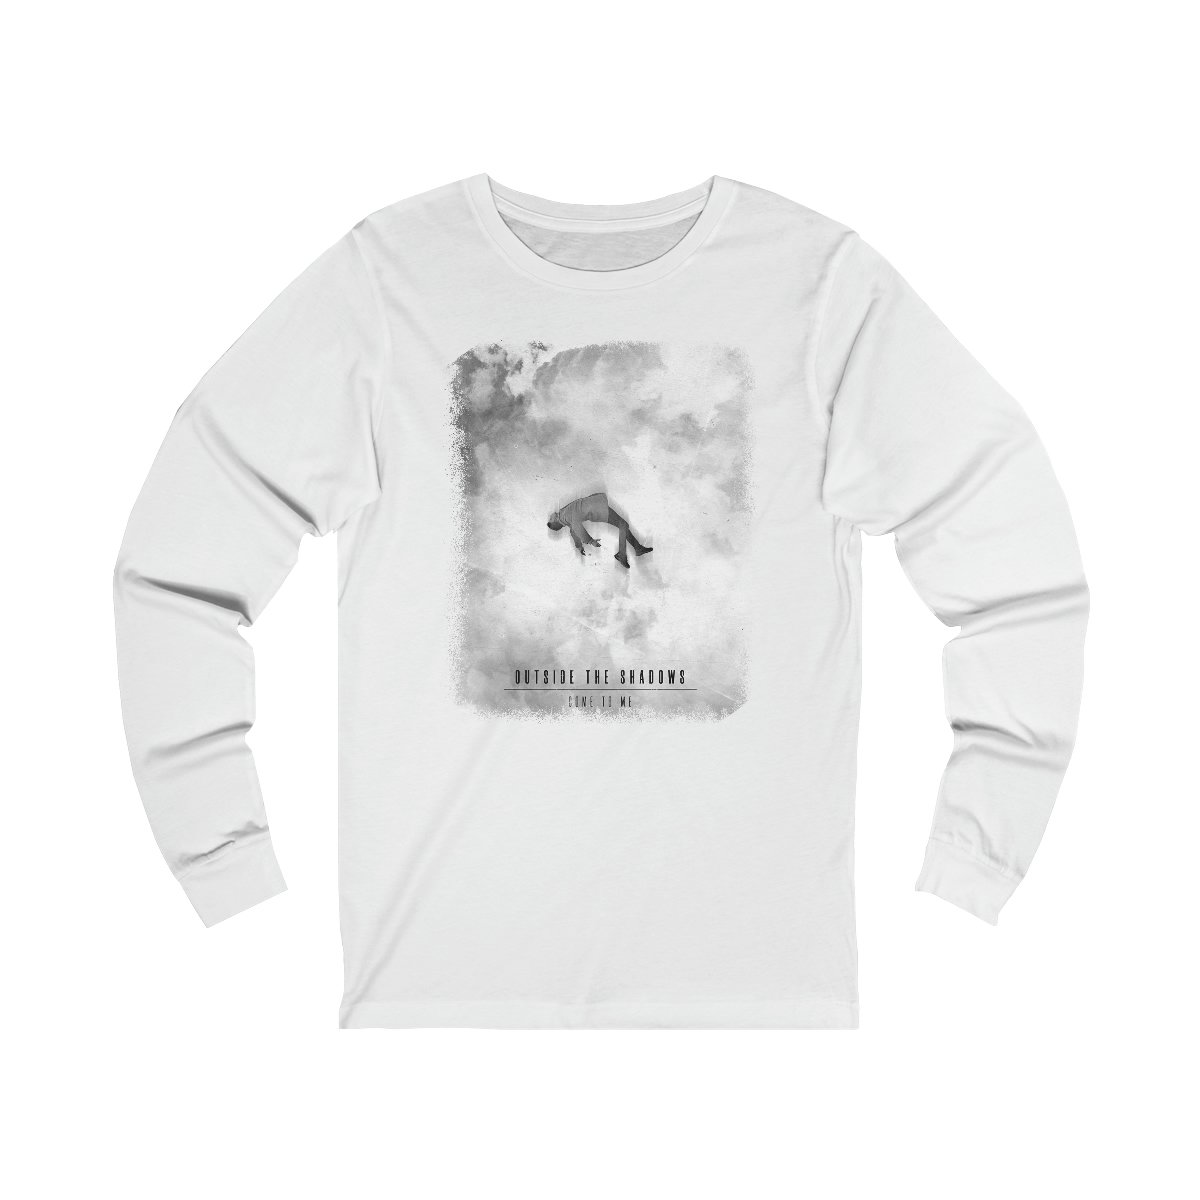 Outside the Shadows – Come to Me BW Long Sleeve Tshirt 3501